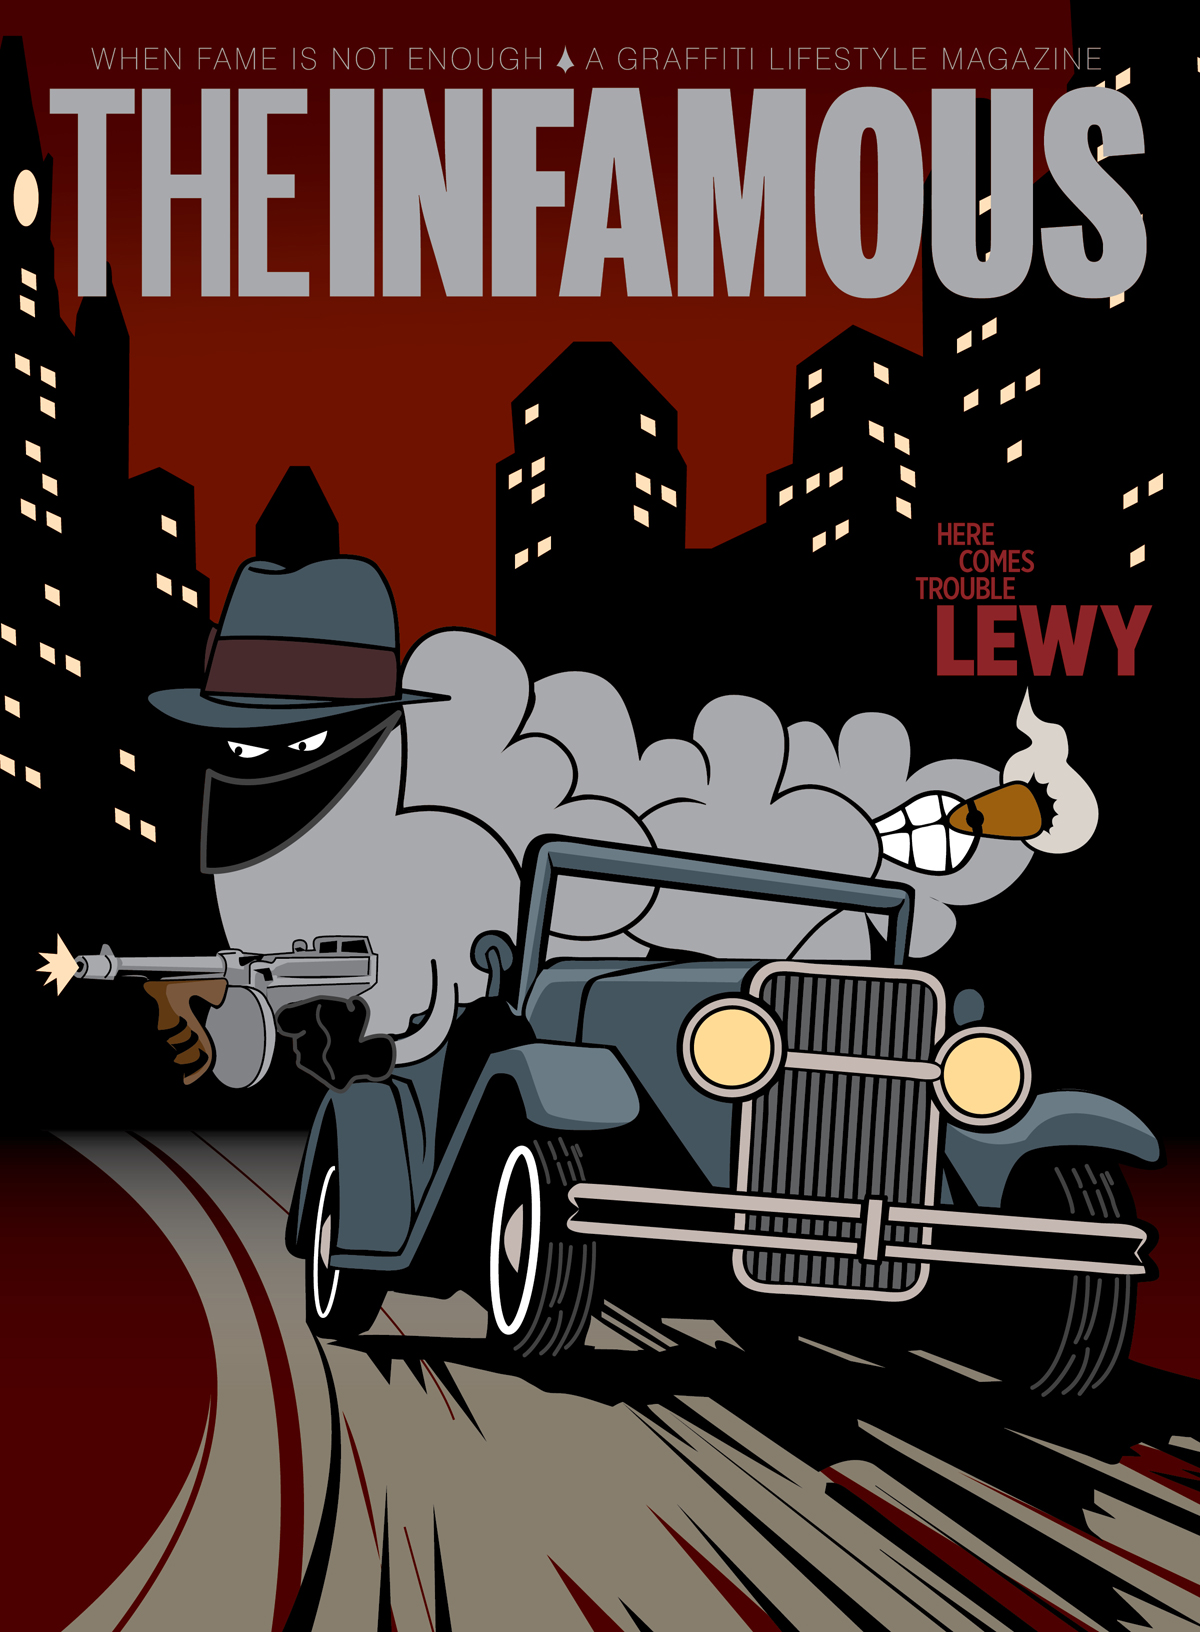 Cover of Issue 6 of The Infamous magazine, 2011. Illustration by Ikews.